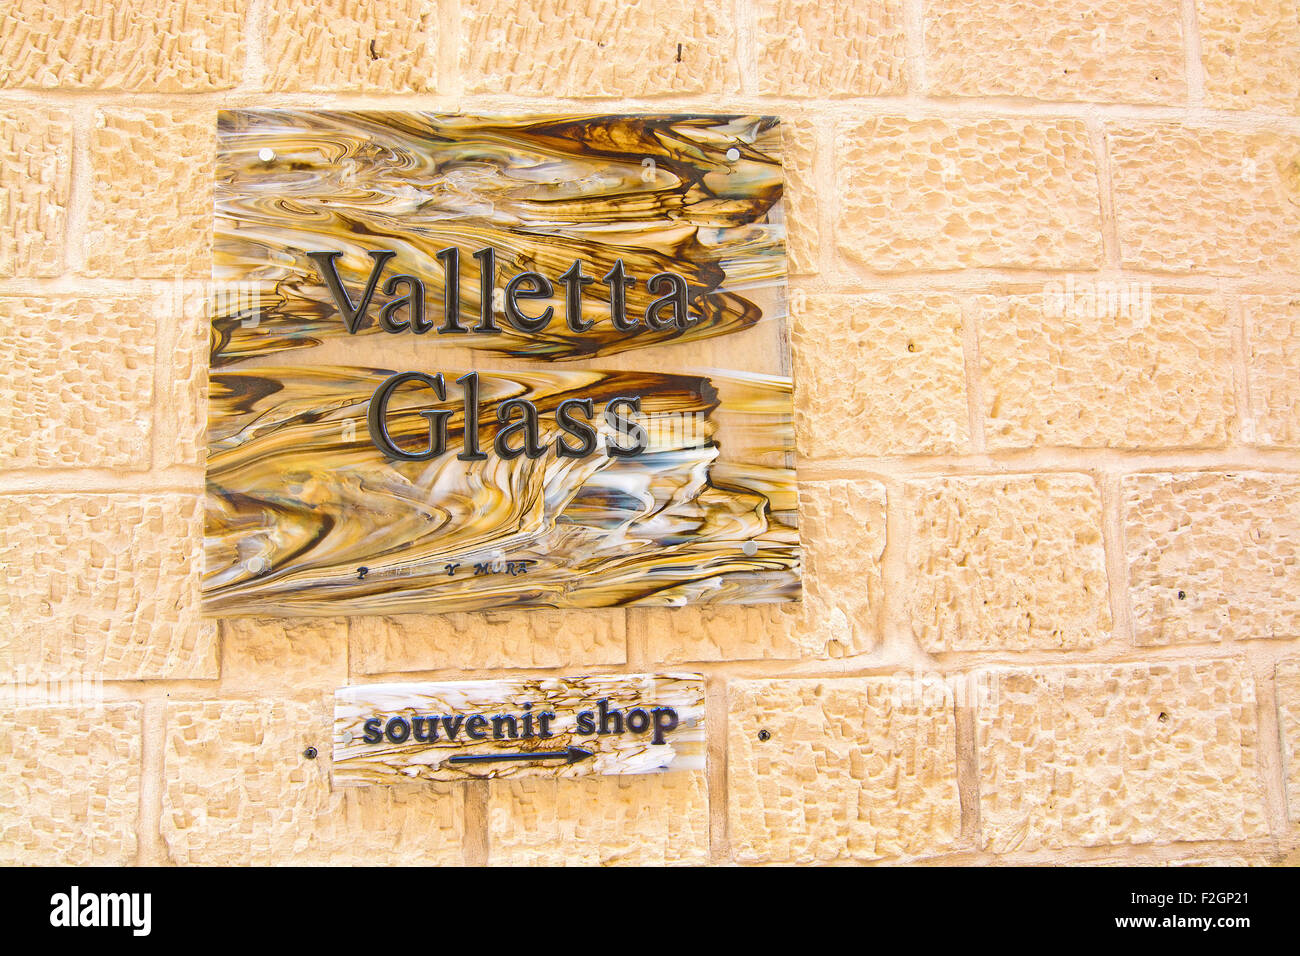 Valletta glass sign within old city walls Stock Photo